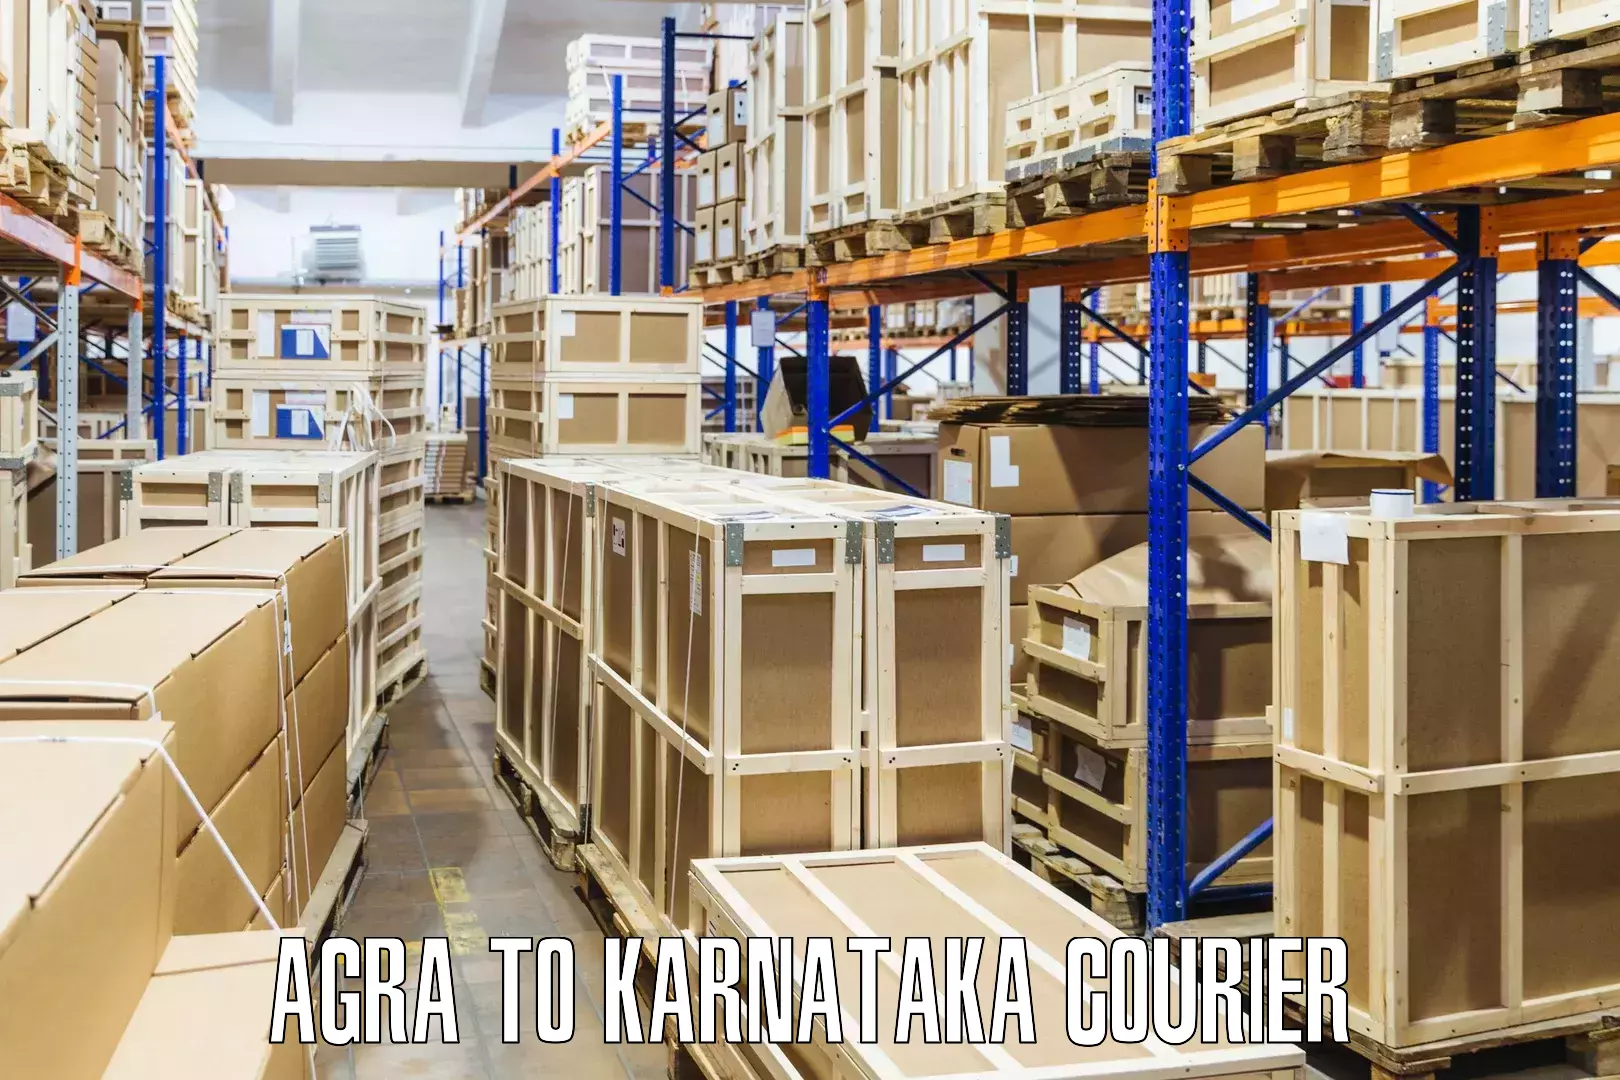 Advanced parcel tracking Agra to Jagalur